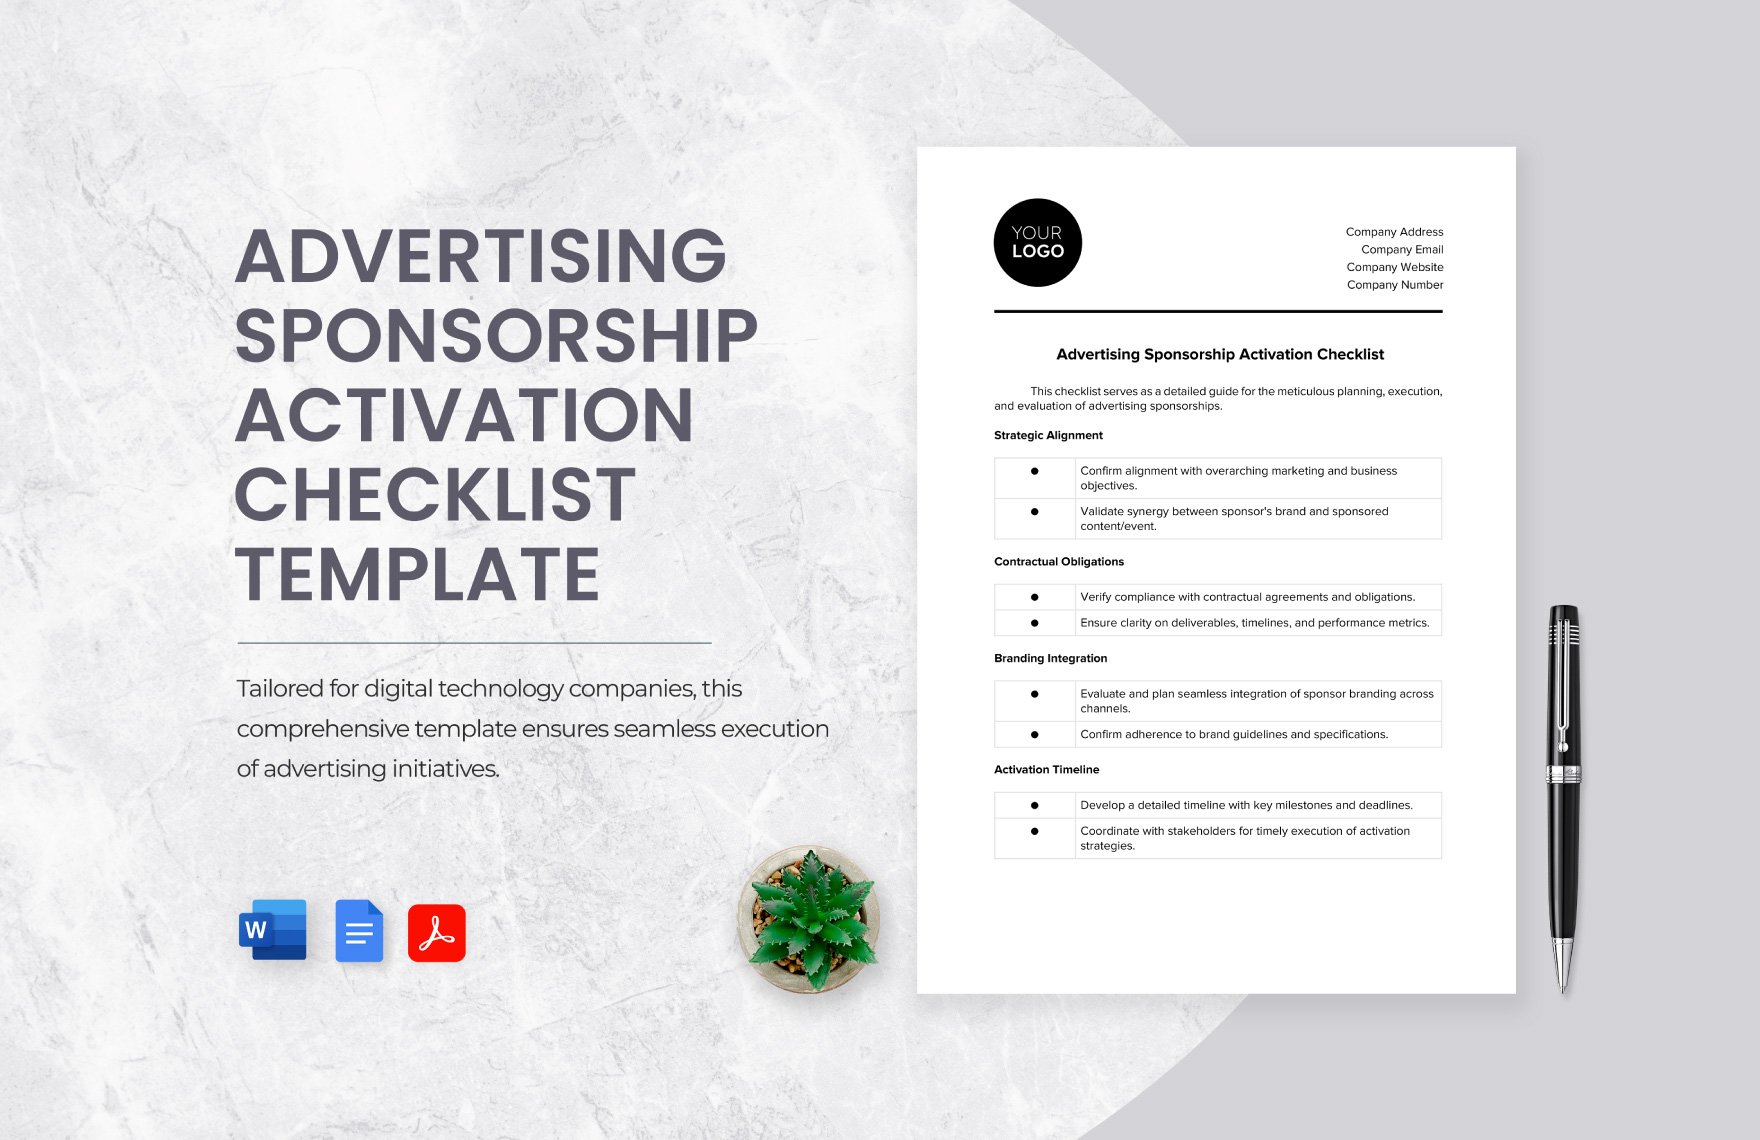 Advertising Sponsorship Activation Checklist Template in Word, Google Docs, PDF